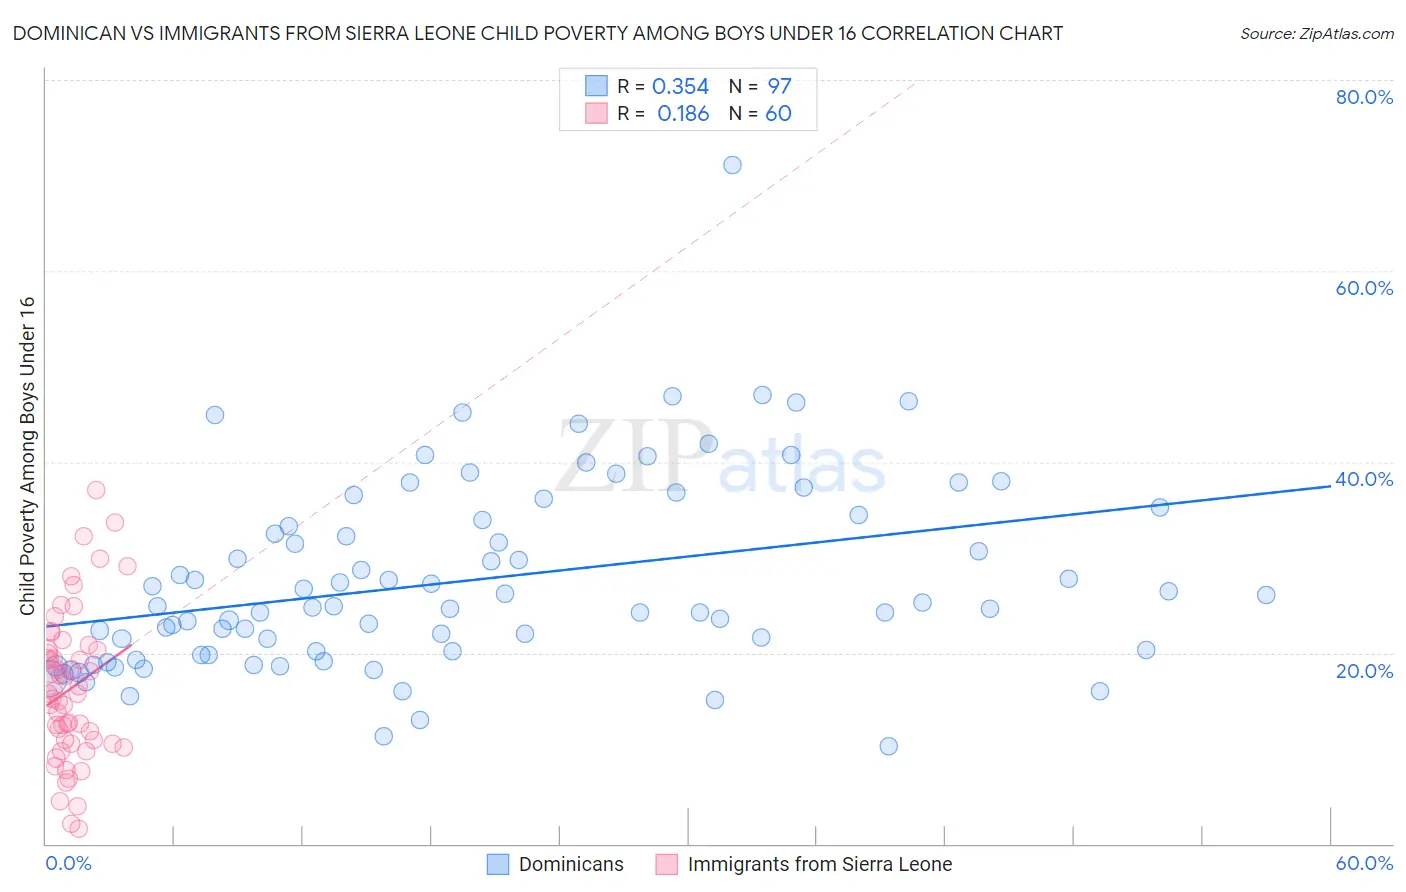 Dominican vs Immigrants from Sierra Leone Child Poverty Among Boys Under 16